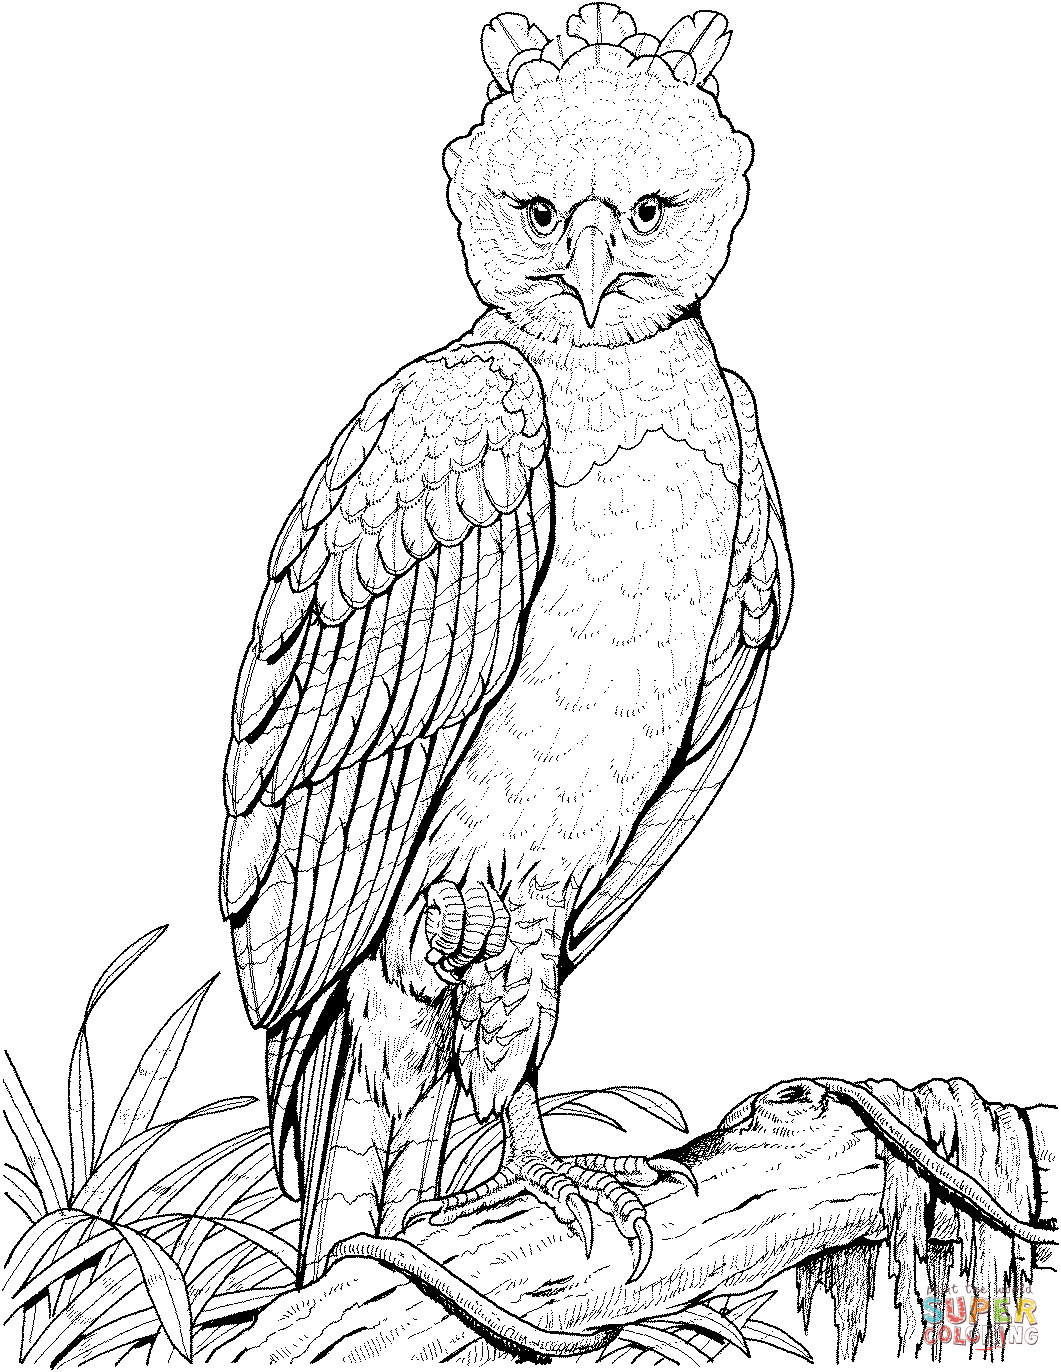 Phillipine Eagle coloring #17, Download drawings